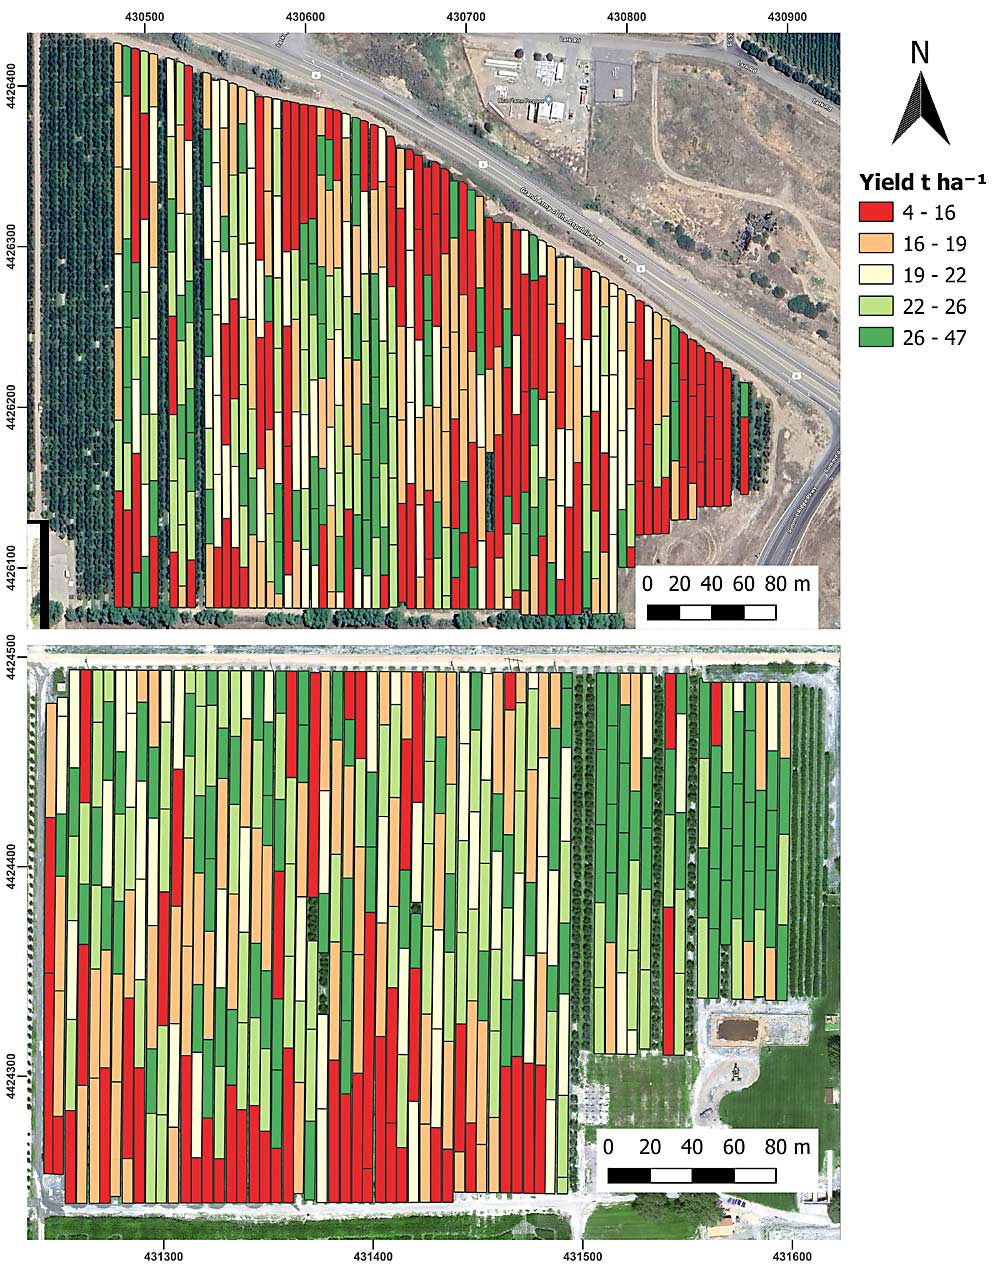 Digital maps based on yield-monitoring data show tart cherry growers the yield variability in their orchard blocks. The information can help them make more efficient management decisions. (Courtesy Anderson Safre/Utah State University)